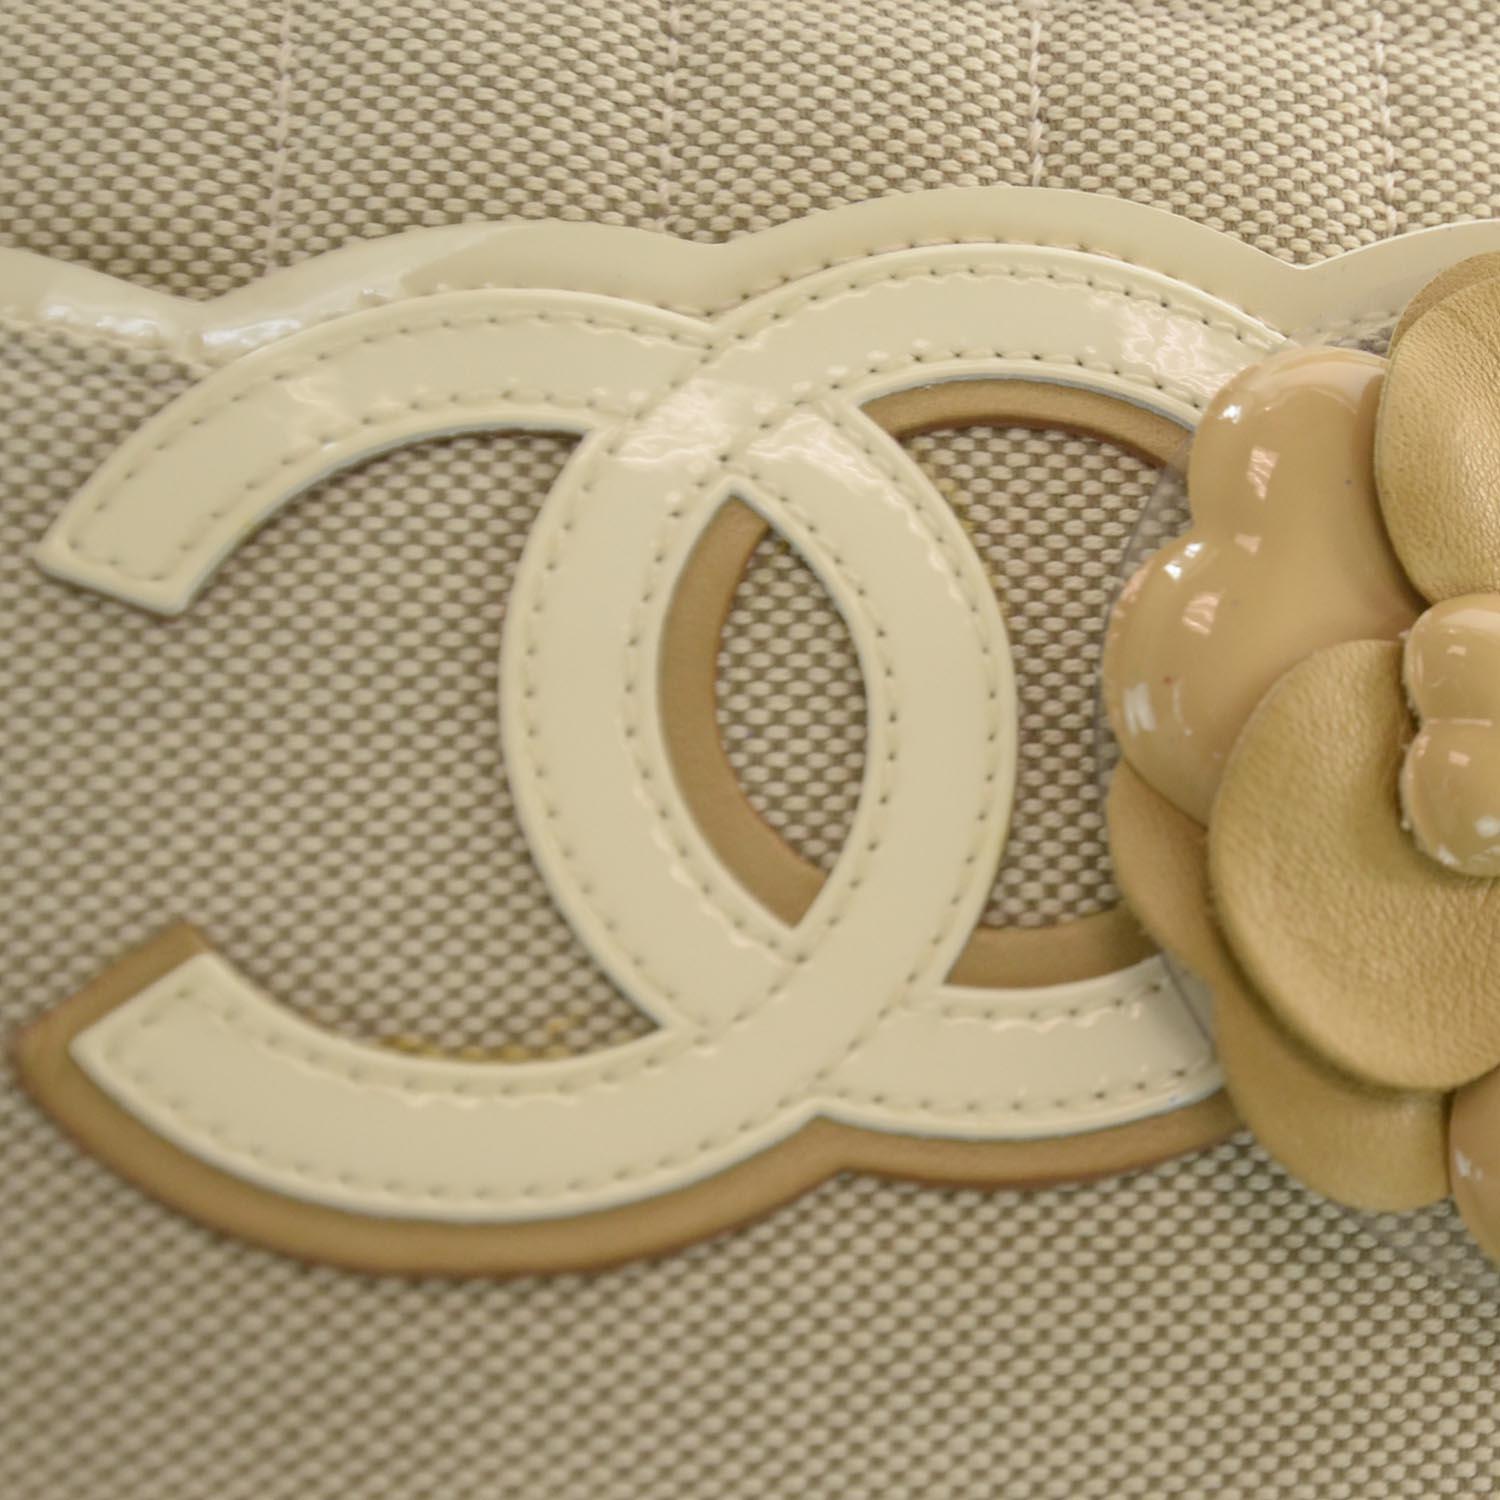 Chanel 2006 Vintage Beige Camelia Flower Canvas Satchel Shopping Tote Bag

2006 {VINTAGE 18 Years}

Silver hardware
Lambskin camelia flower
Dual shoulder straps with open top
Beige Grey Square Quilted Canvas
Patent leather piping and CC logo